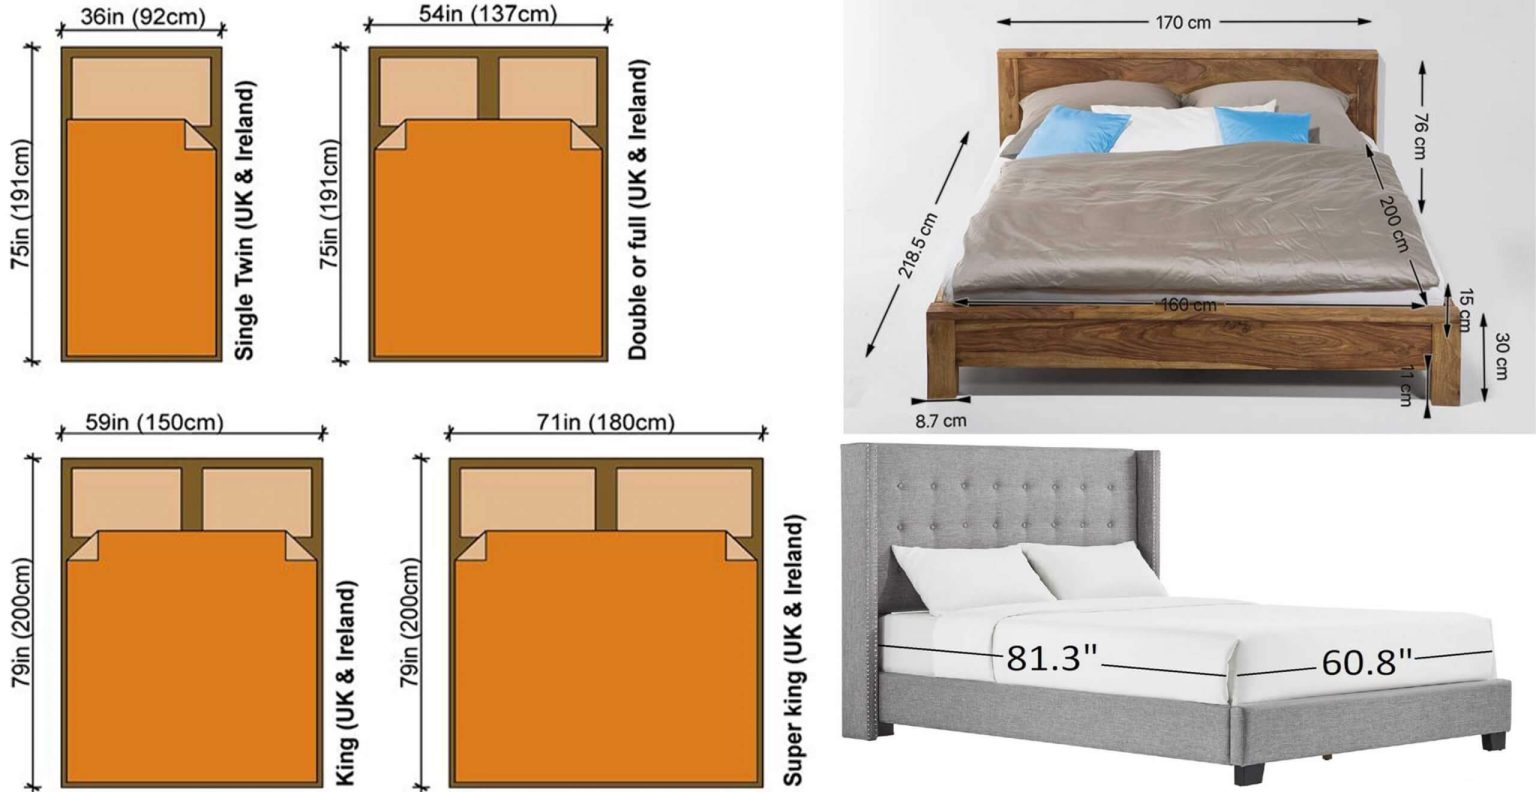 typical bedroom furniture dimensions